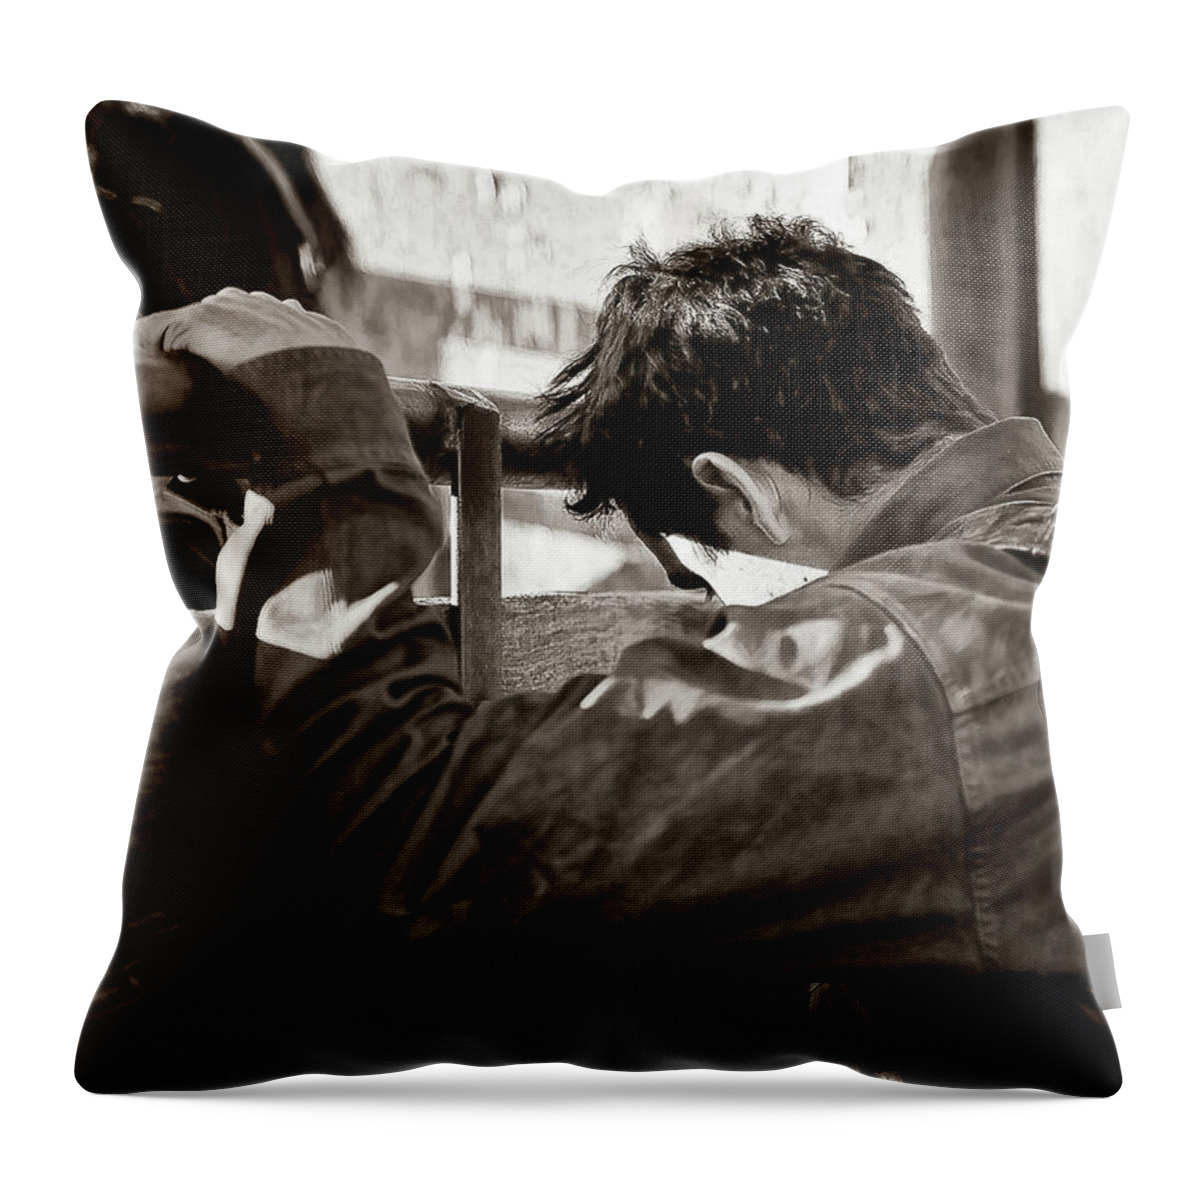 Cowboy Art Throw Pillow featuring the photograph Its The Joy and the Pain by Pamela Steege